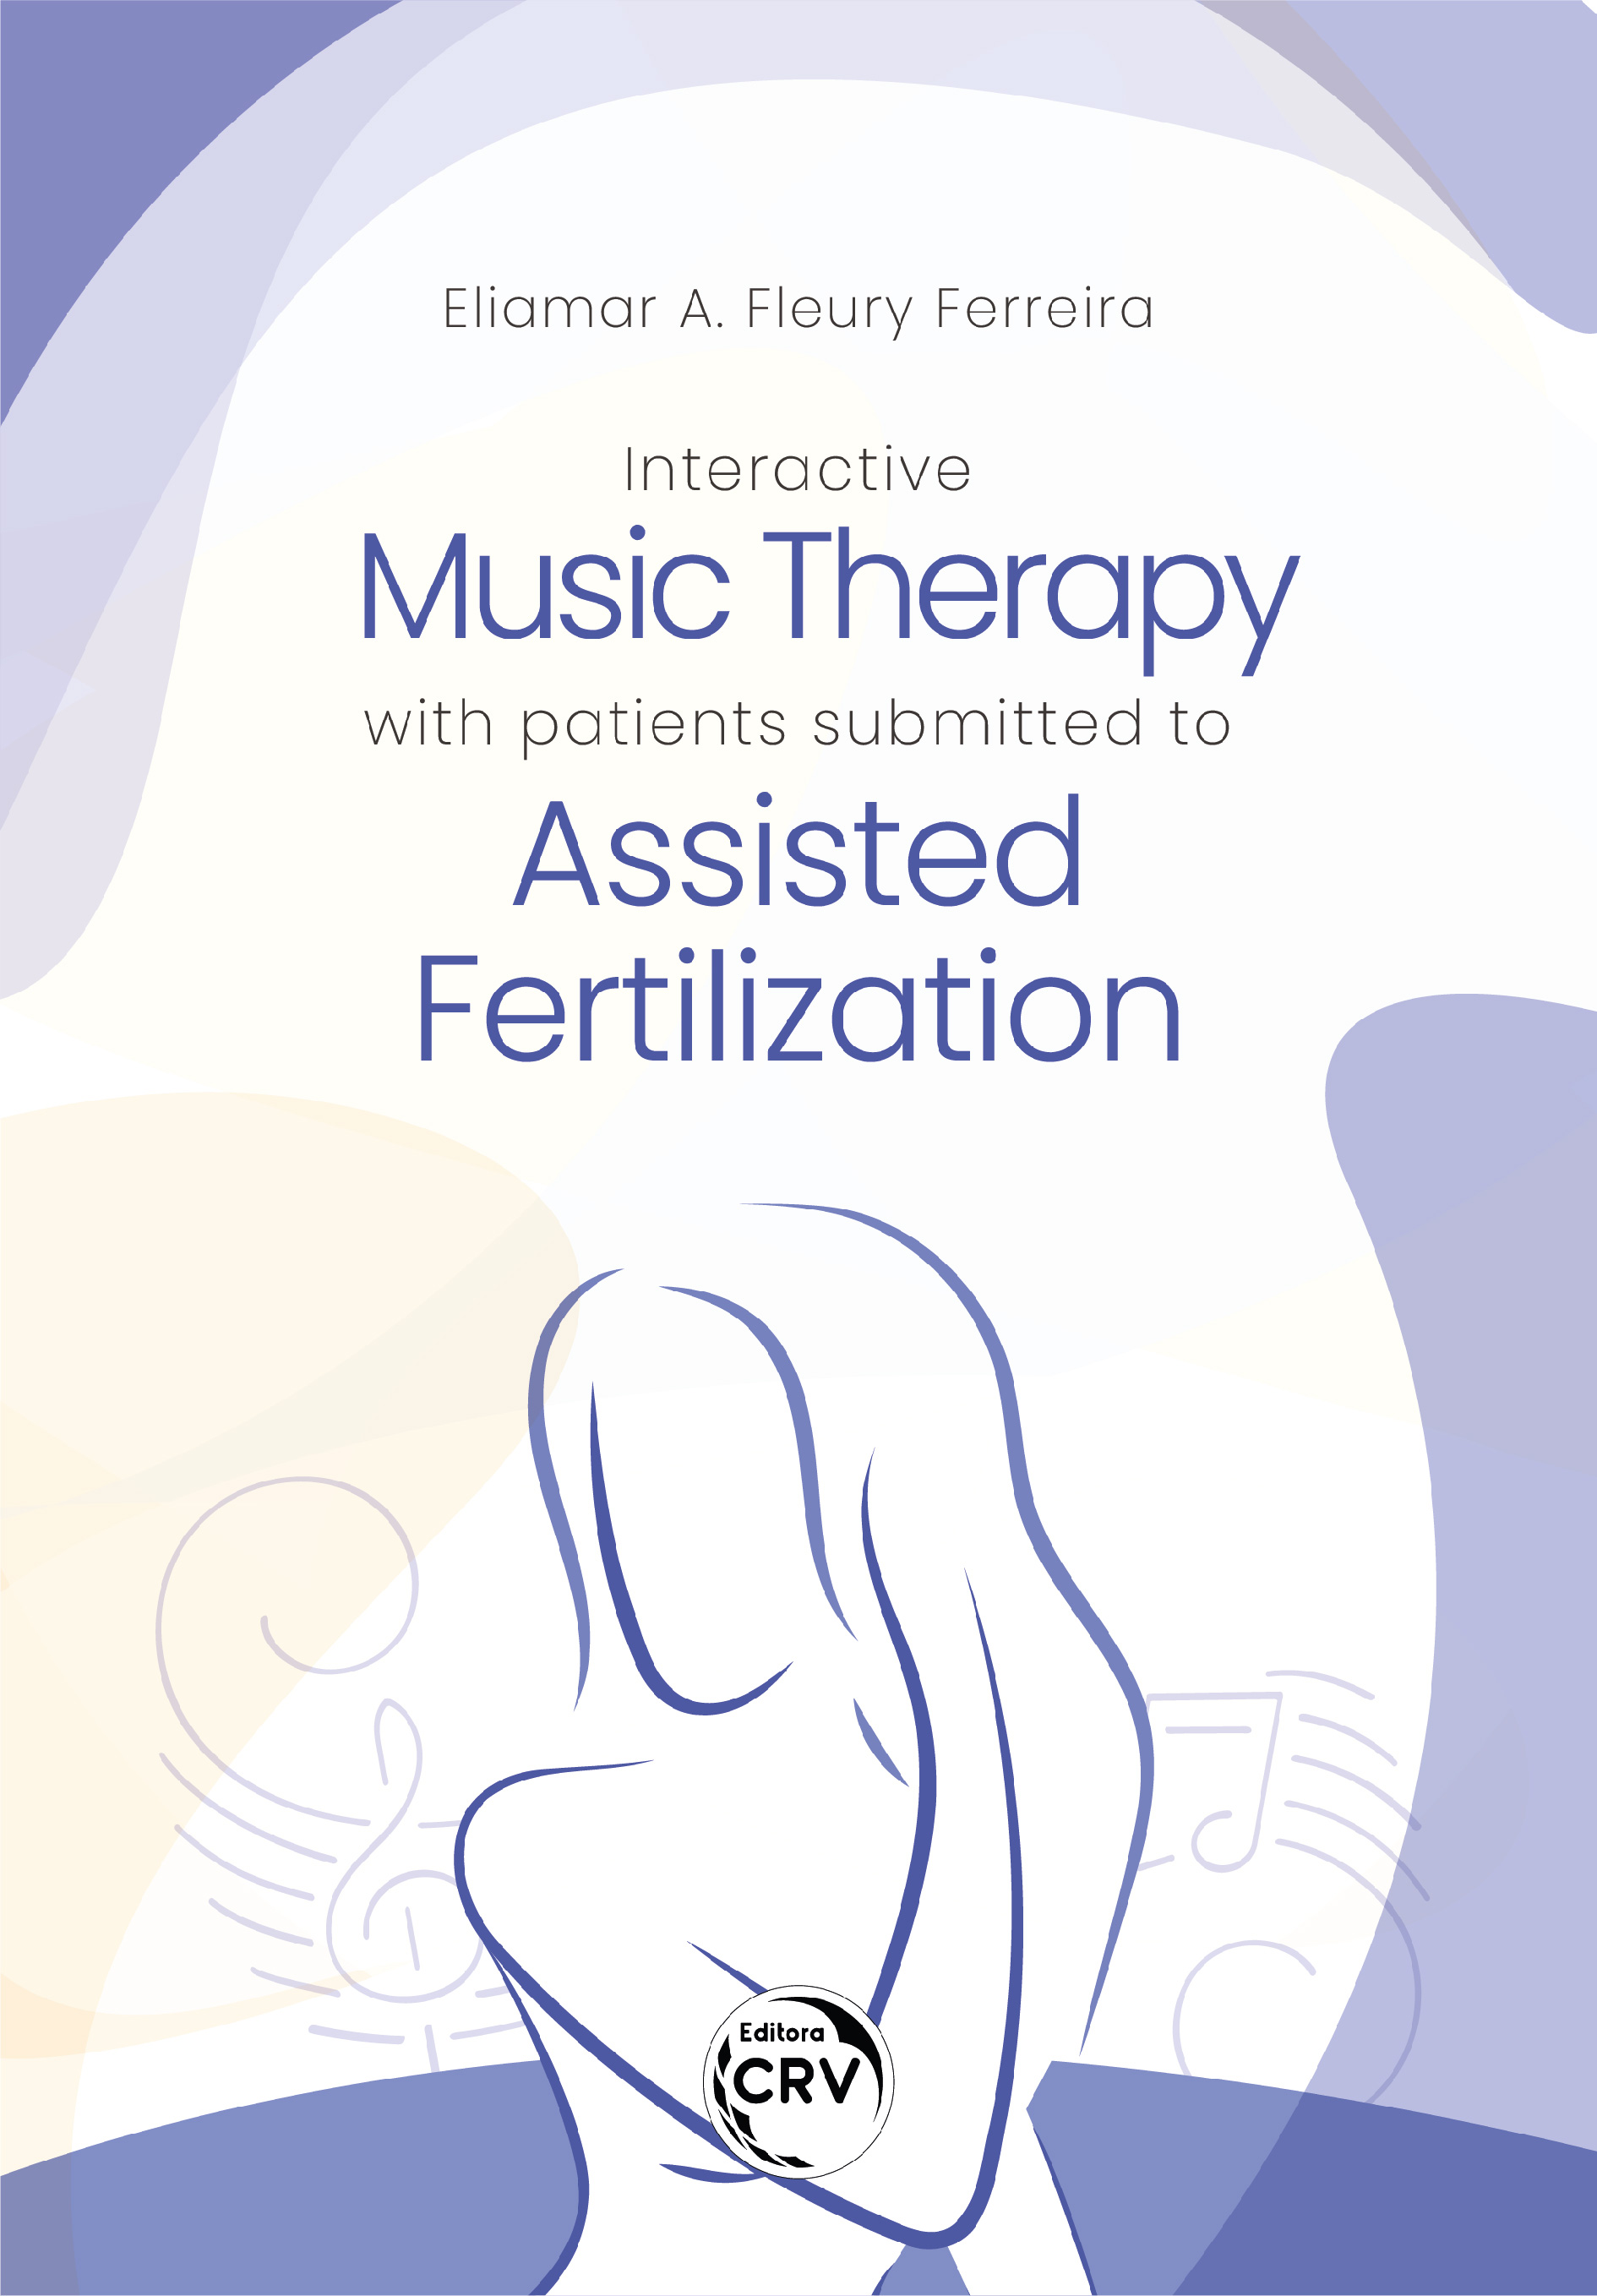 Capa do livro: INTERACTIVE MUSIC THERAPY WITH PATIENTS SUBMITTED TO ASSISTED FERTILIZATION